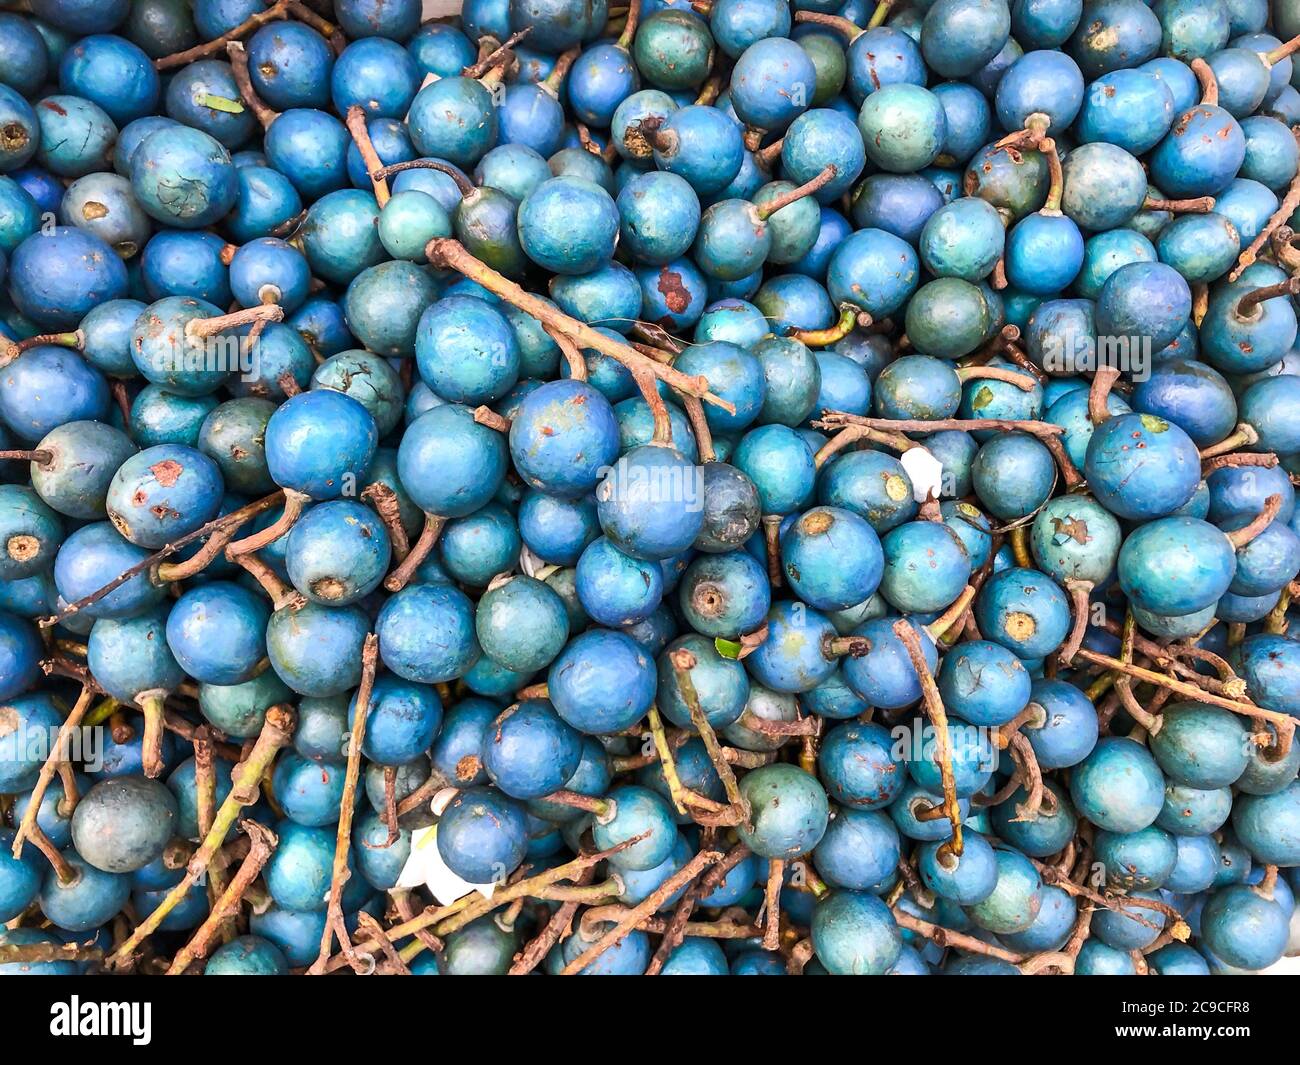 traditional blue olive fruit of Sri Lanka in market as a background Stock Photo